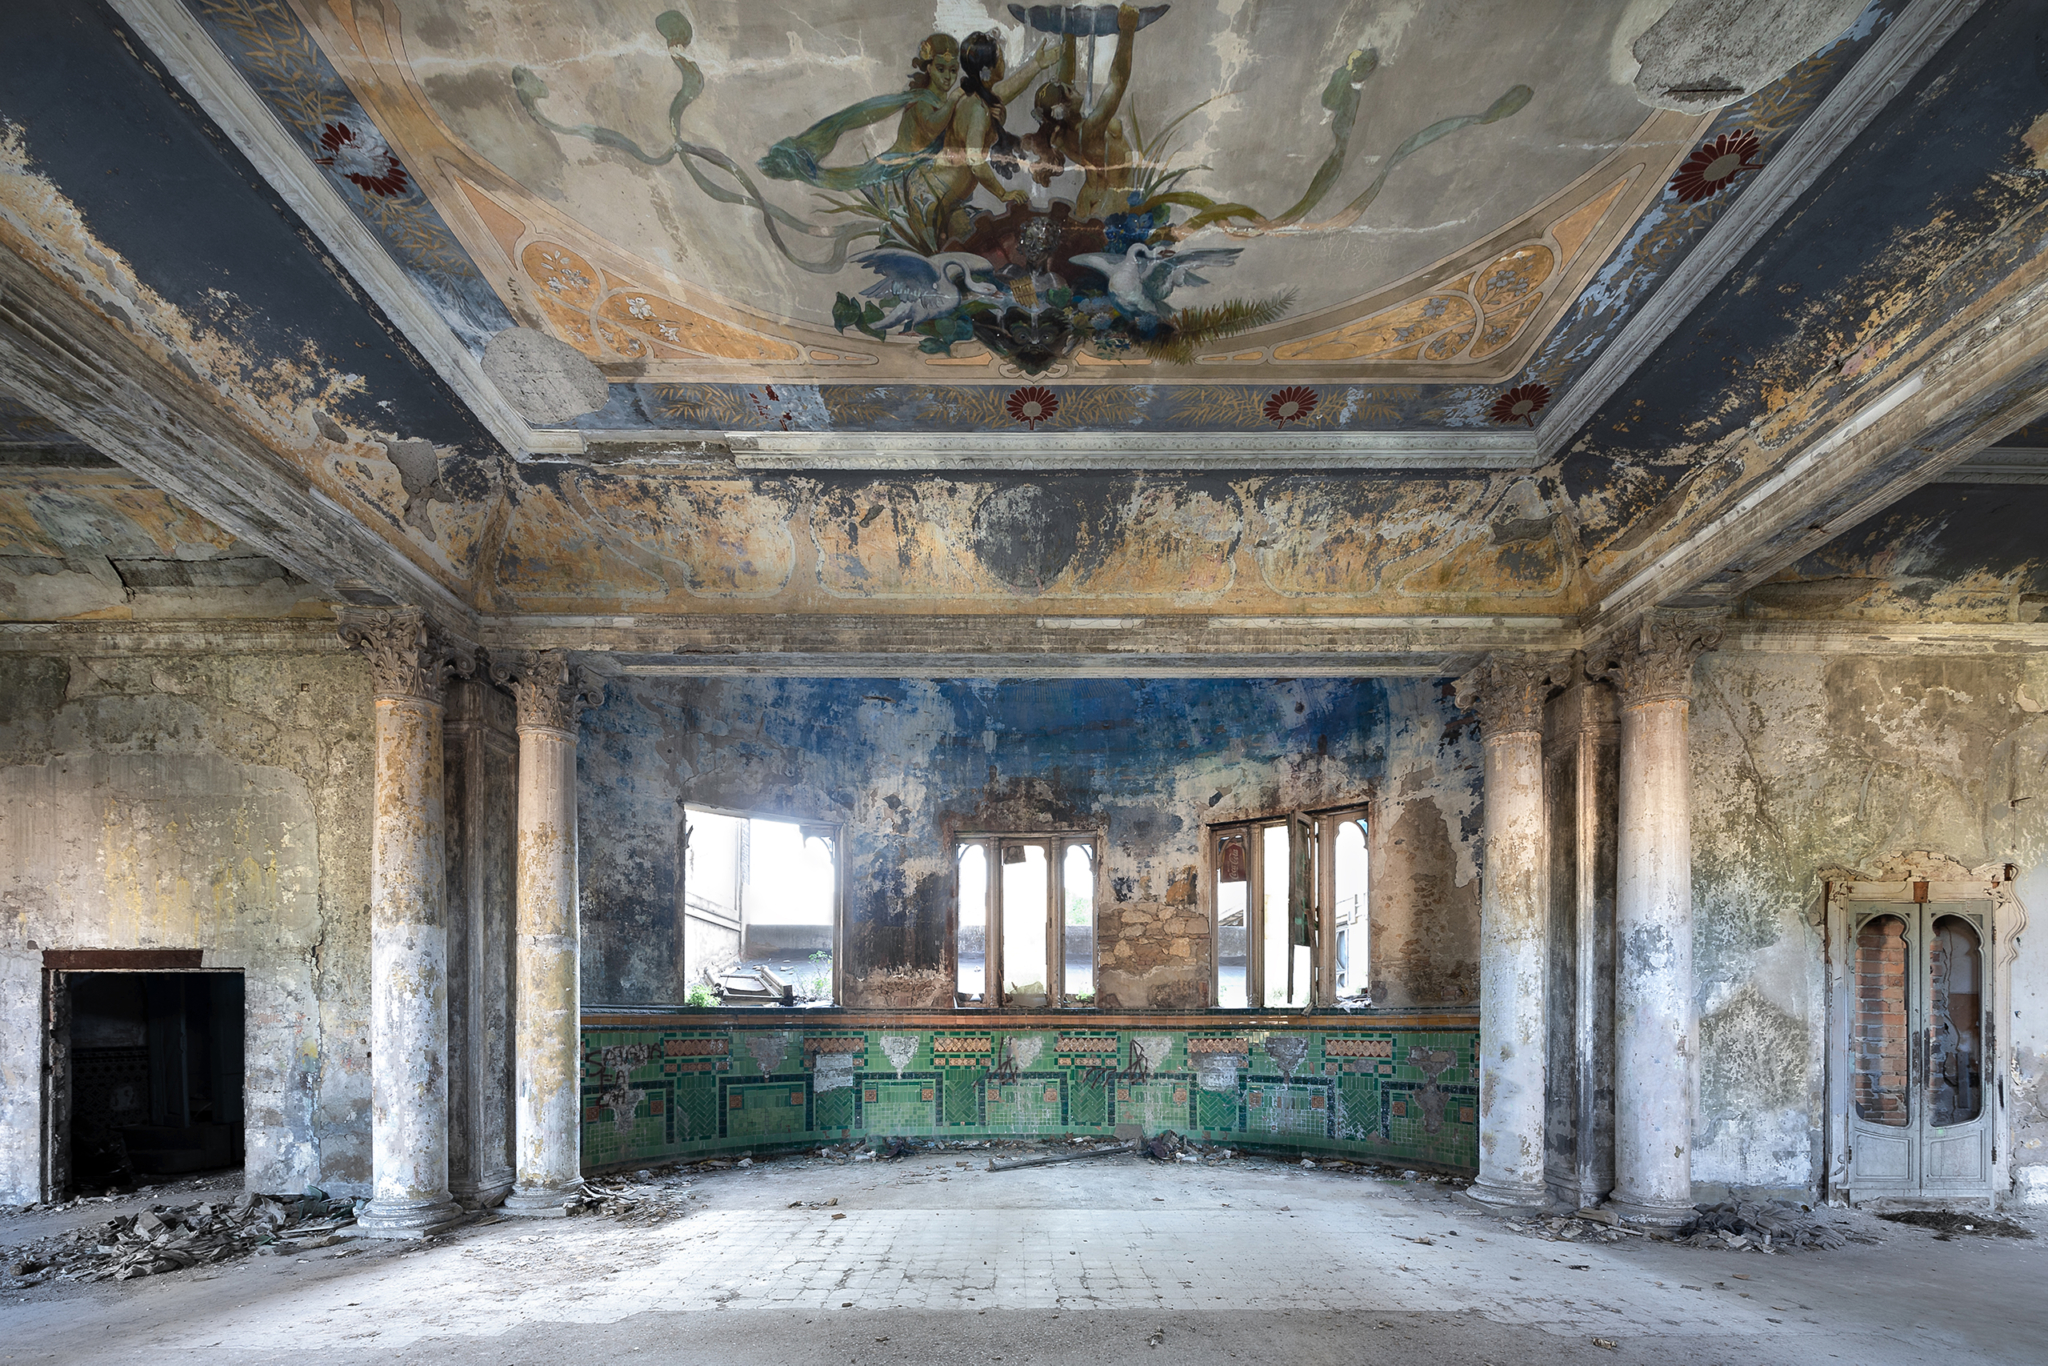 Abandoned thermal baths with grandiose architecture in Italy